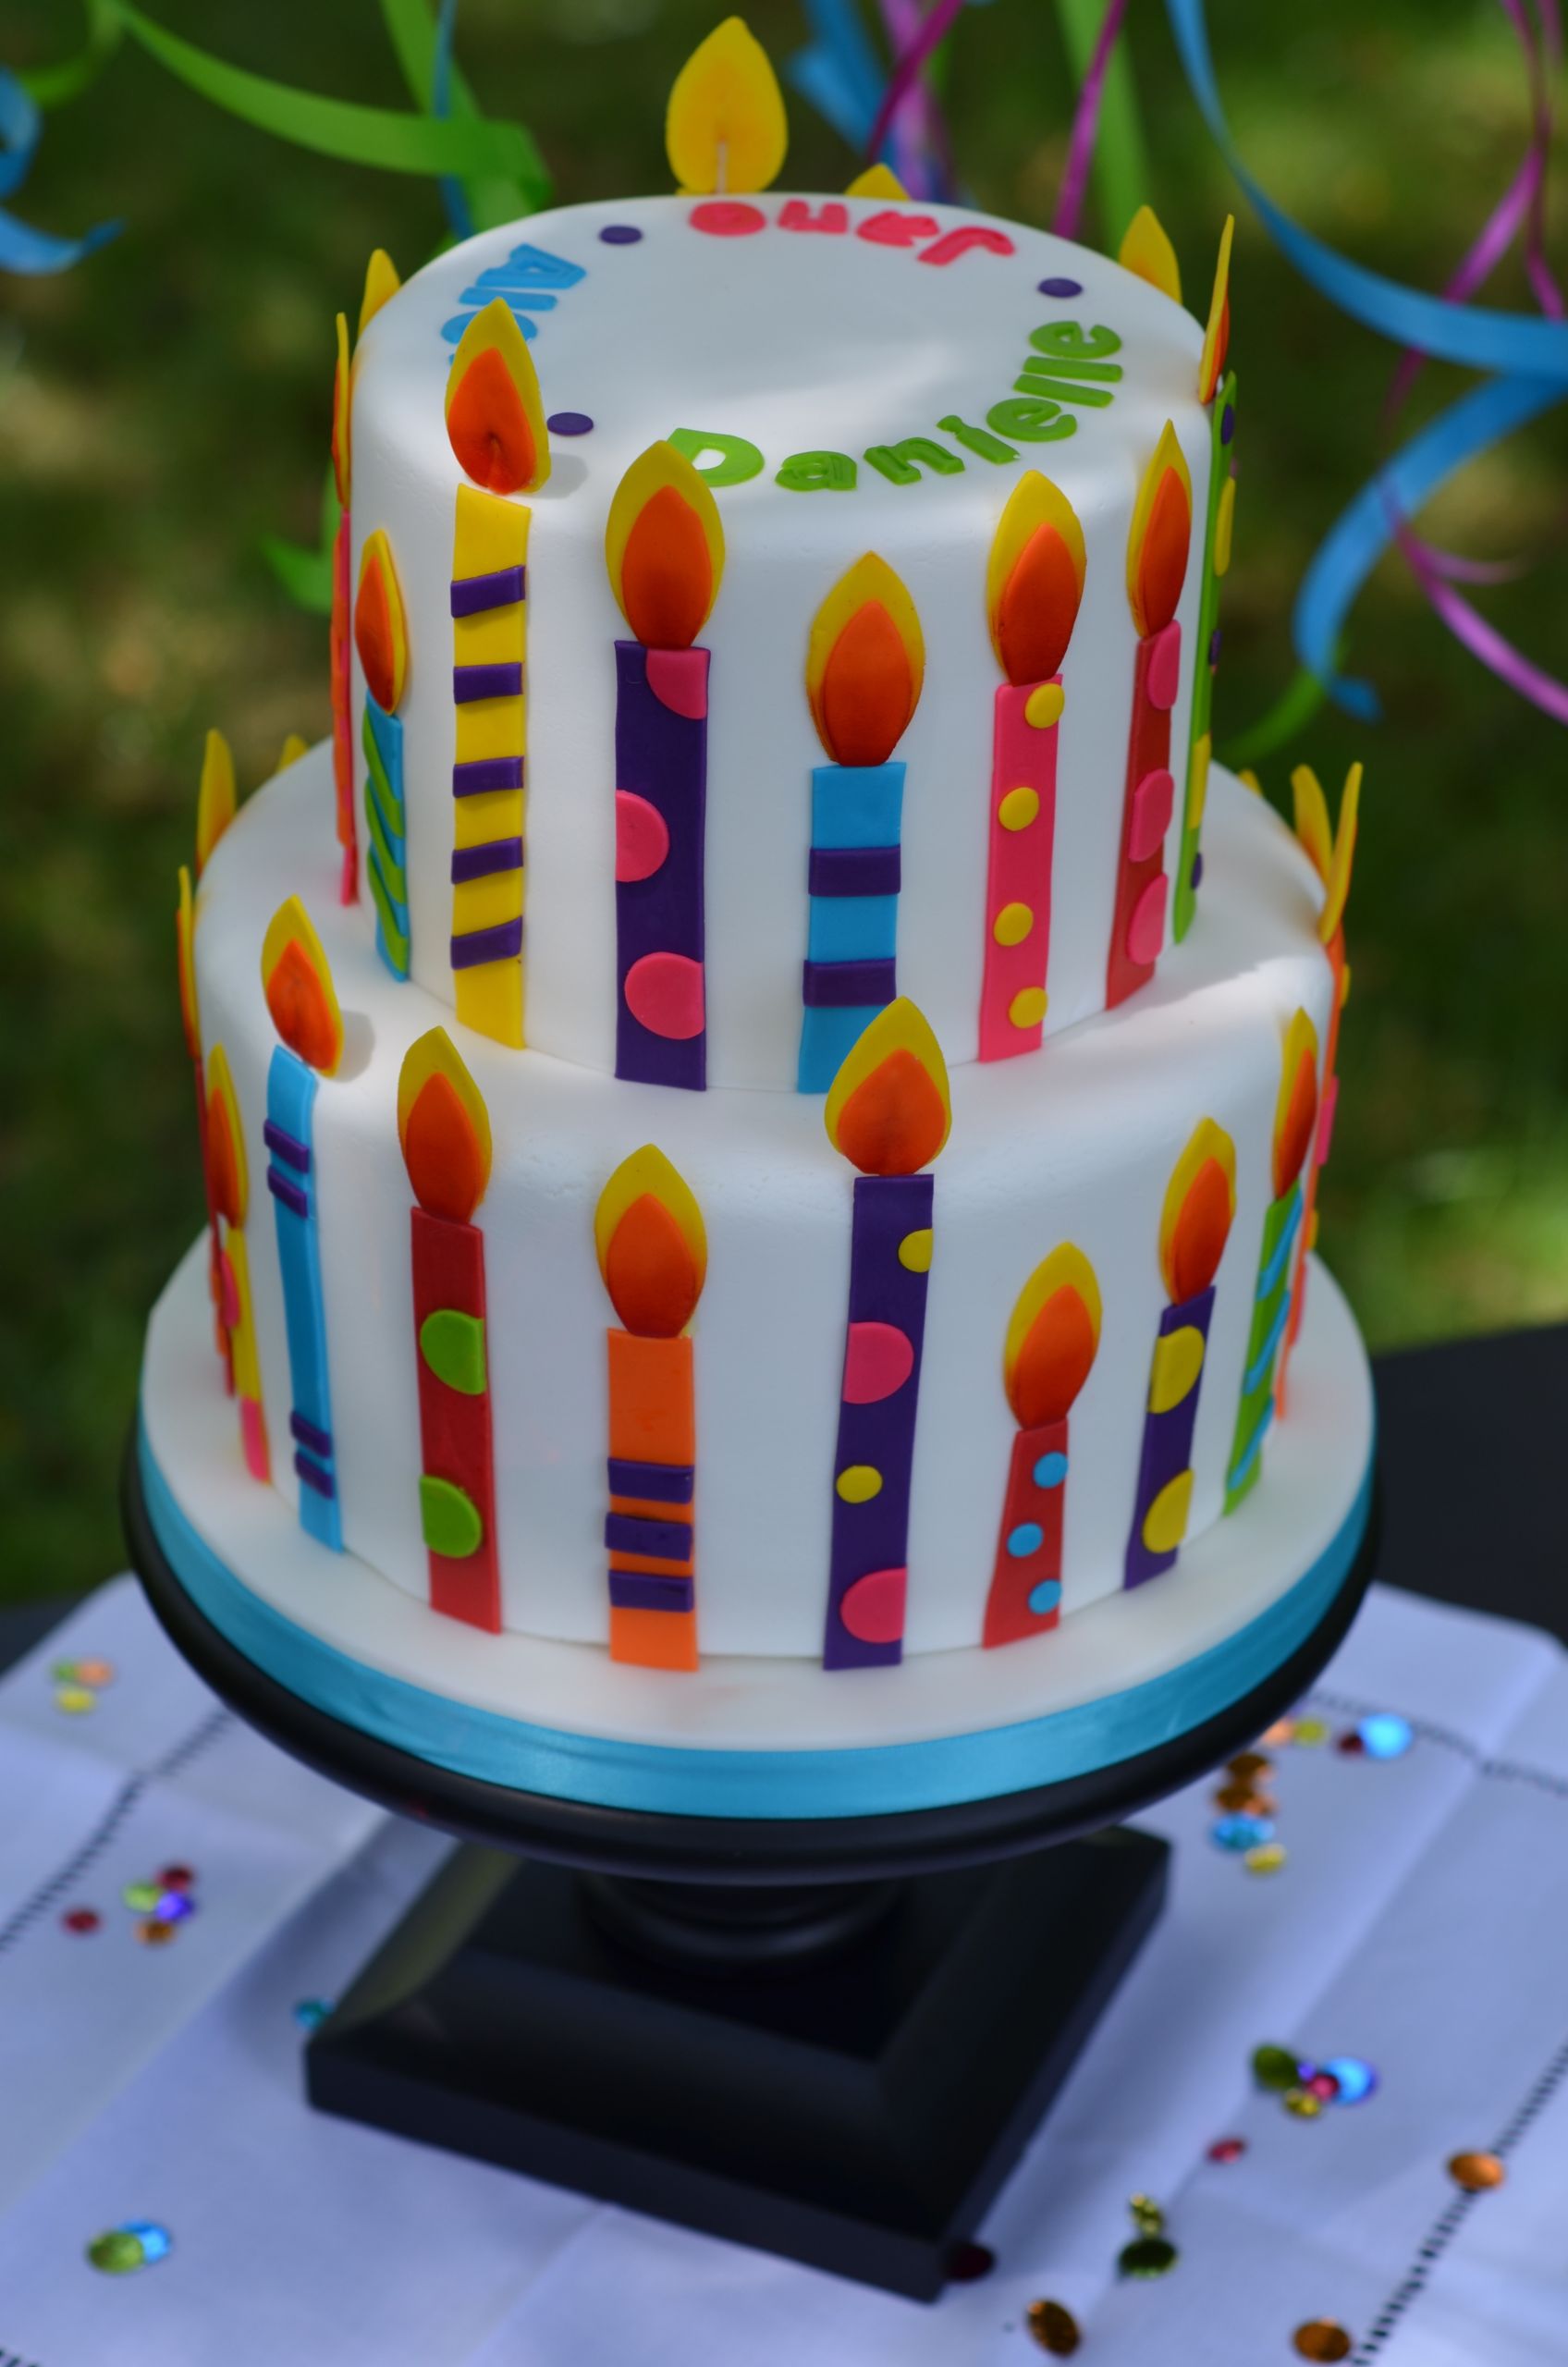 Birthday Cake with Candles Lovely Colorful Fondant Candle Birthday Cake Cakecentral